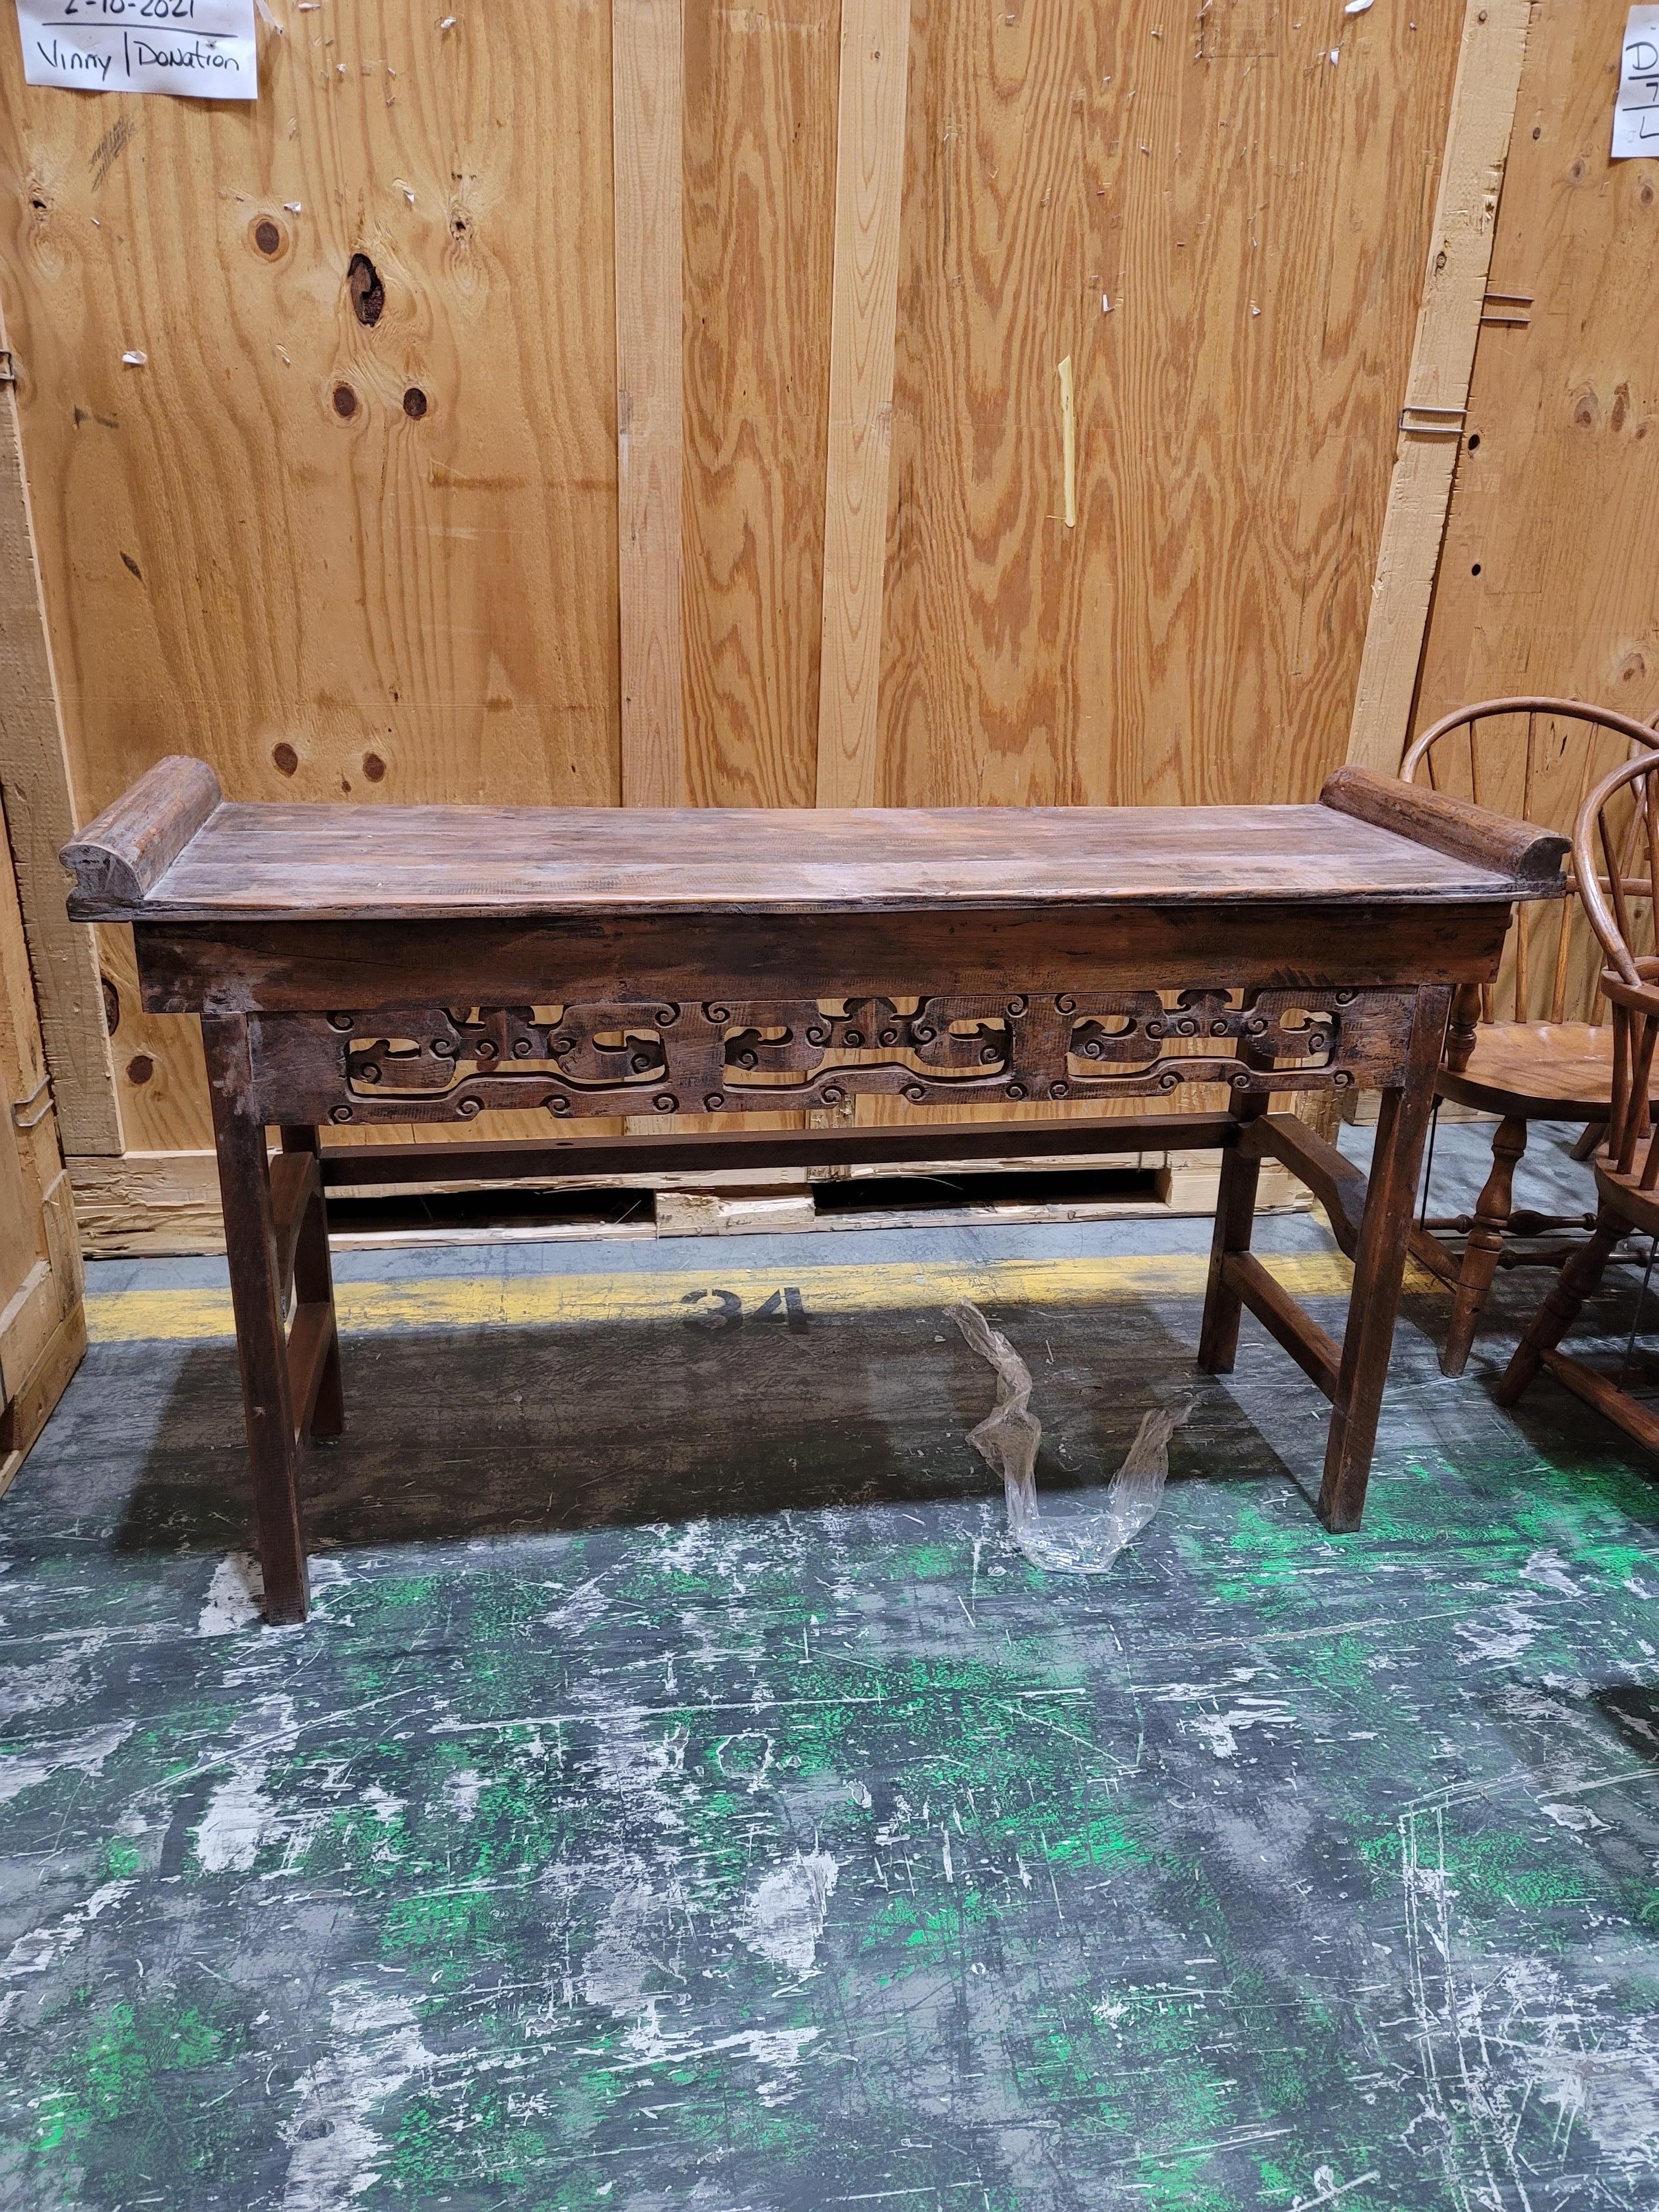 20th Century Chinese Altar Table
Scrolling cut out design along top rail of altar table. General wear, good overall condition.

18